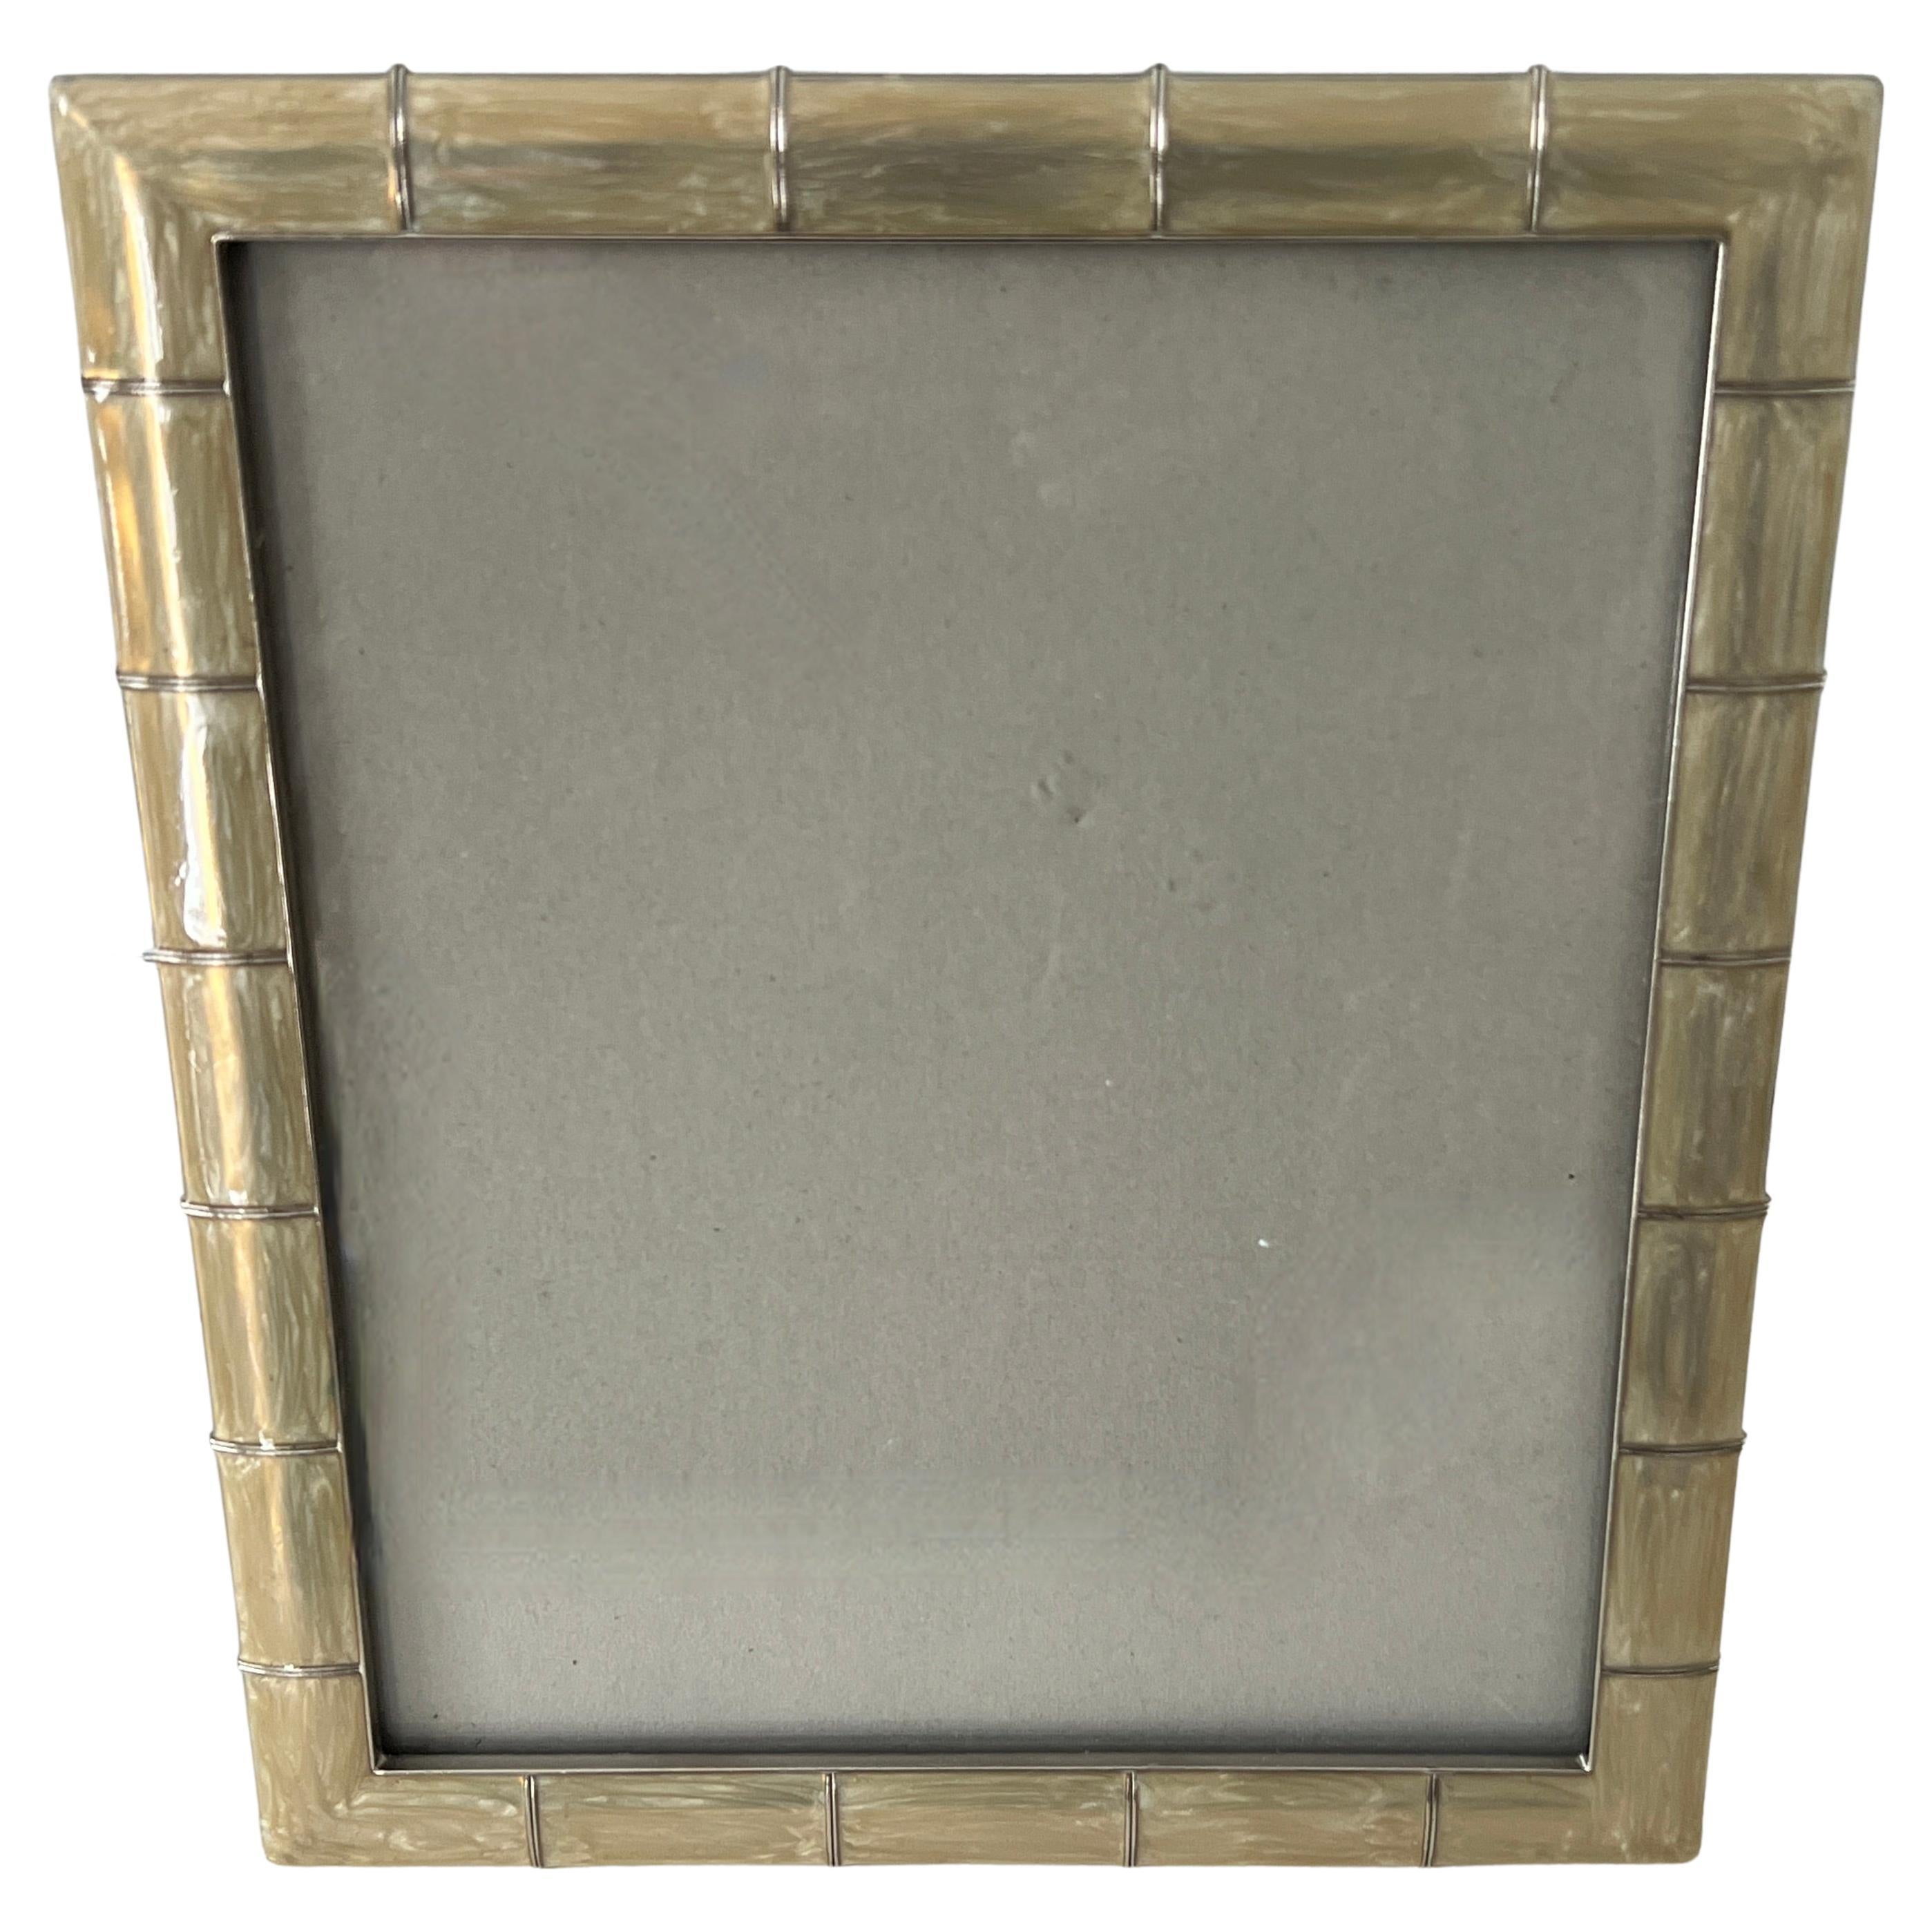 Silver Iridescent Bamboo Style 8 x 10 Picture Frame